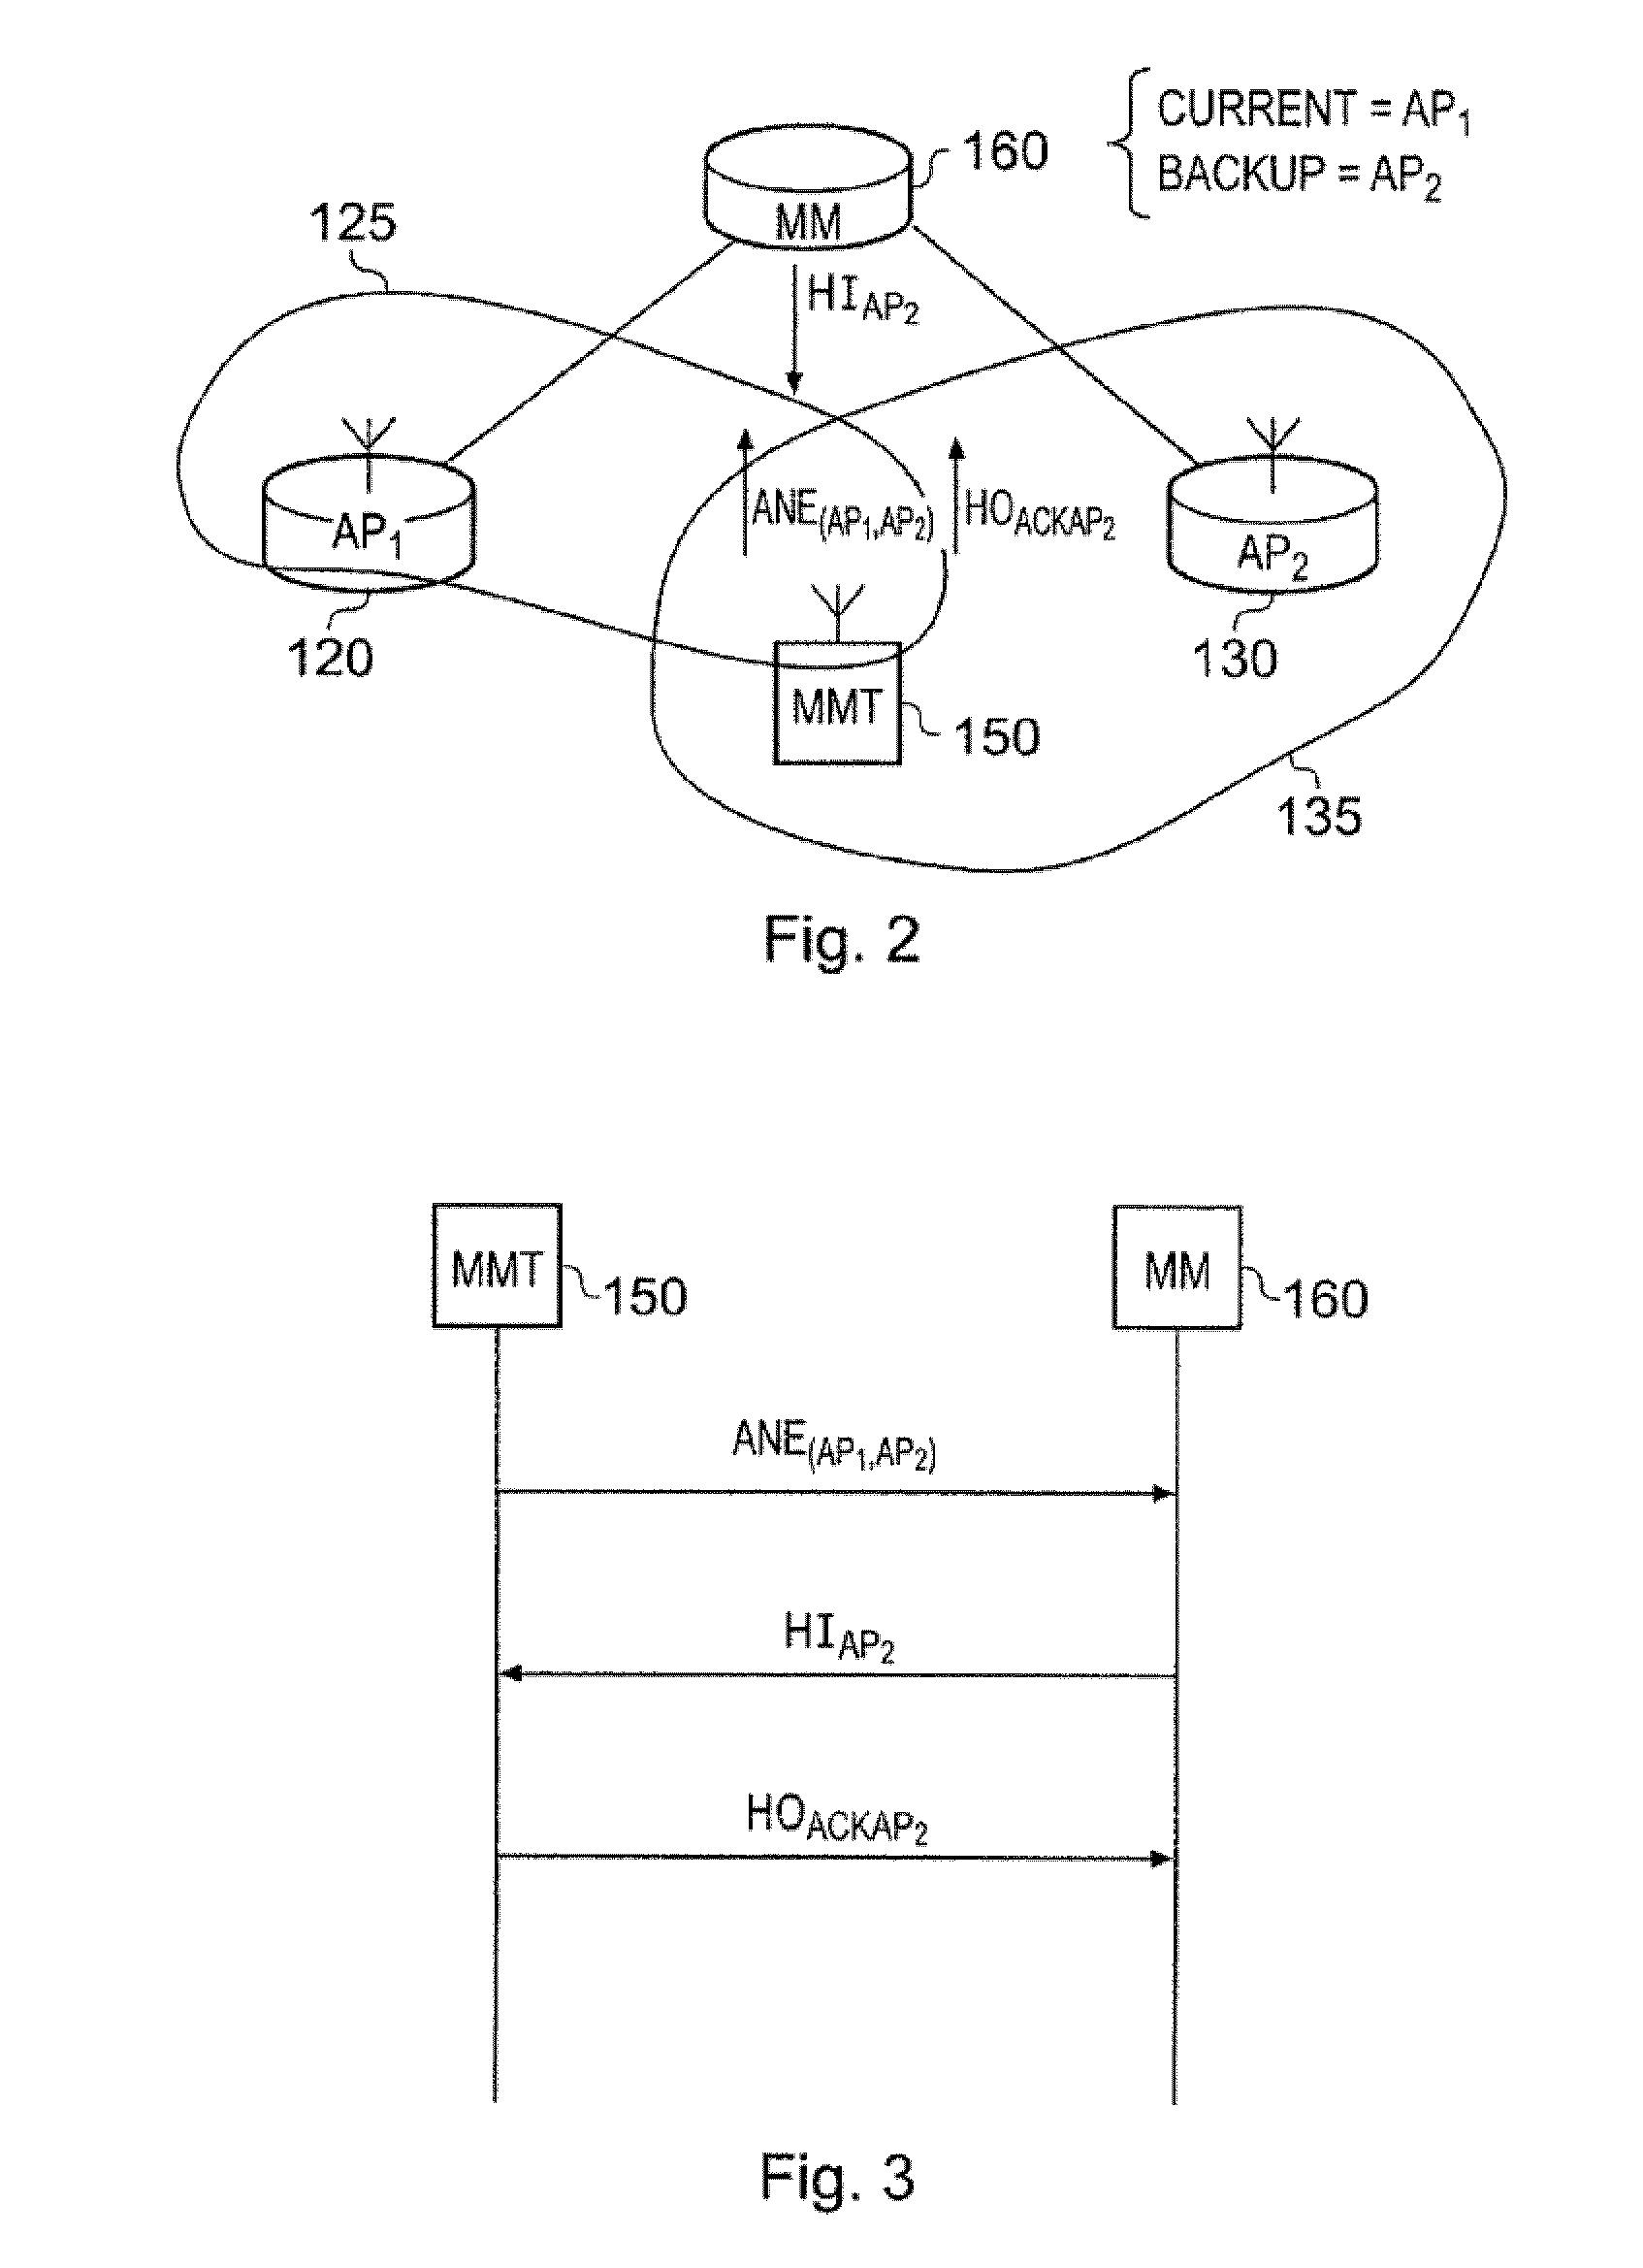 System and method for mobility management